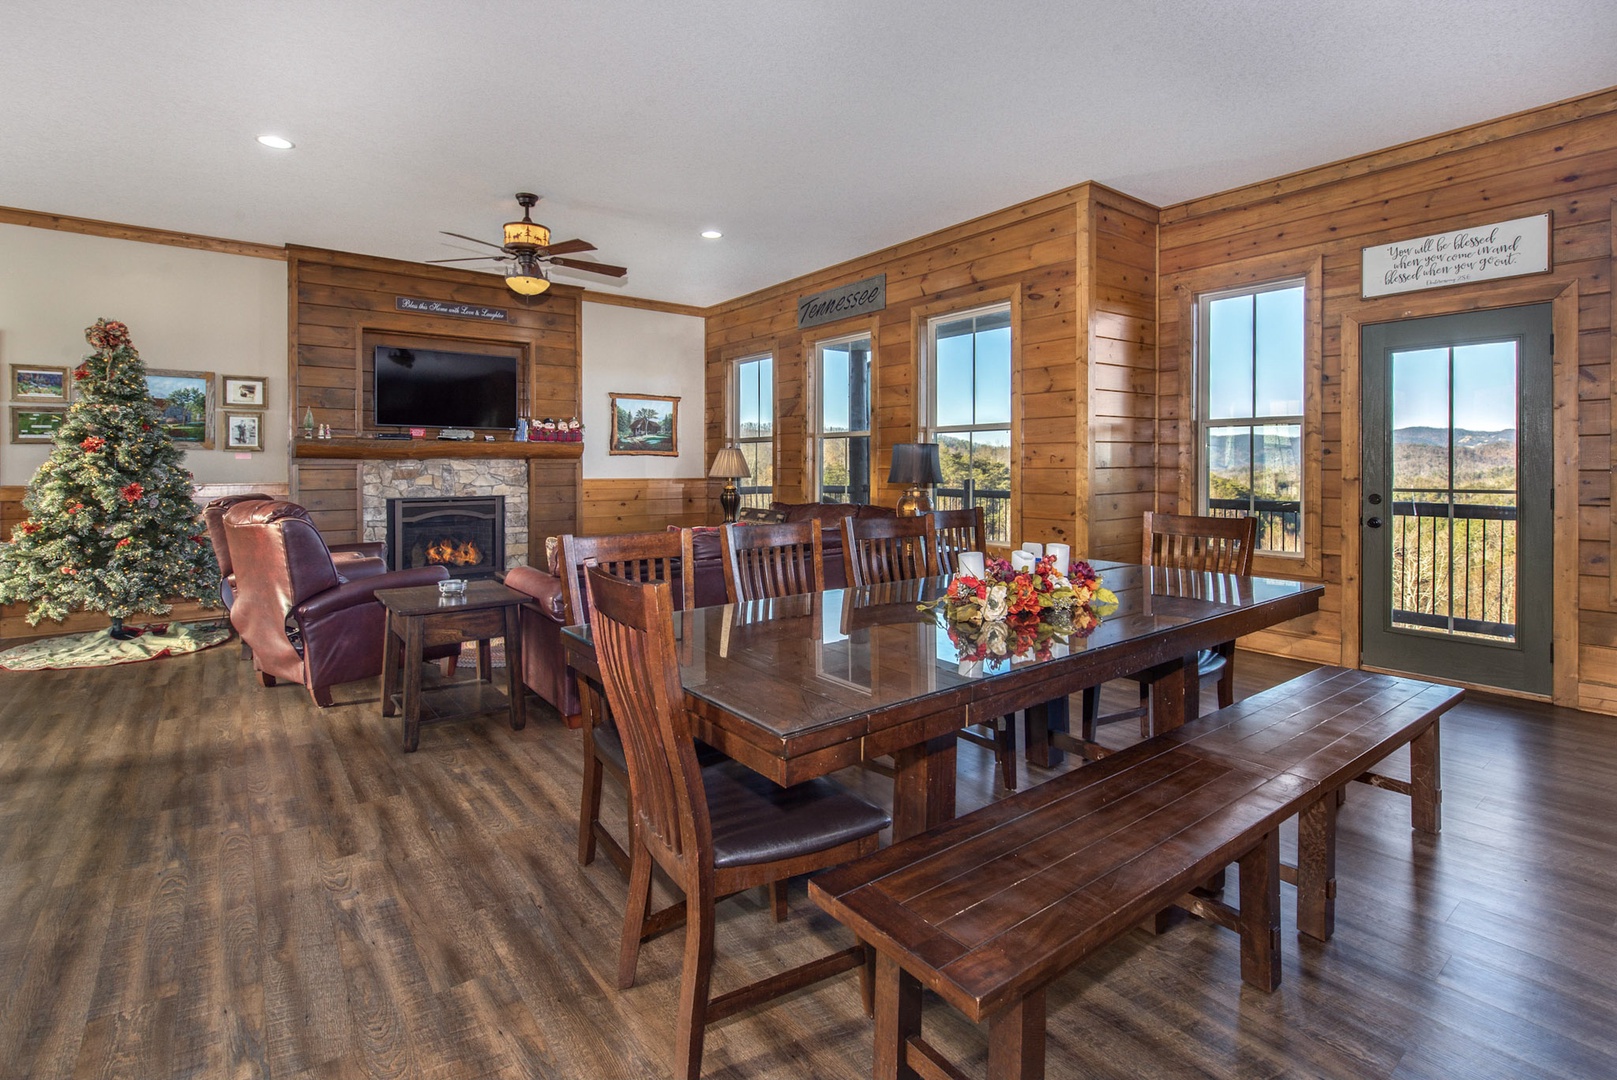 The whole family can enjoy meals with a view in the open dining area